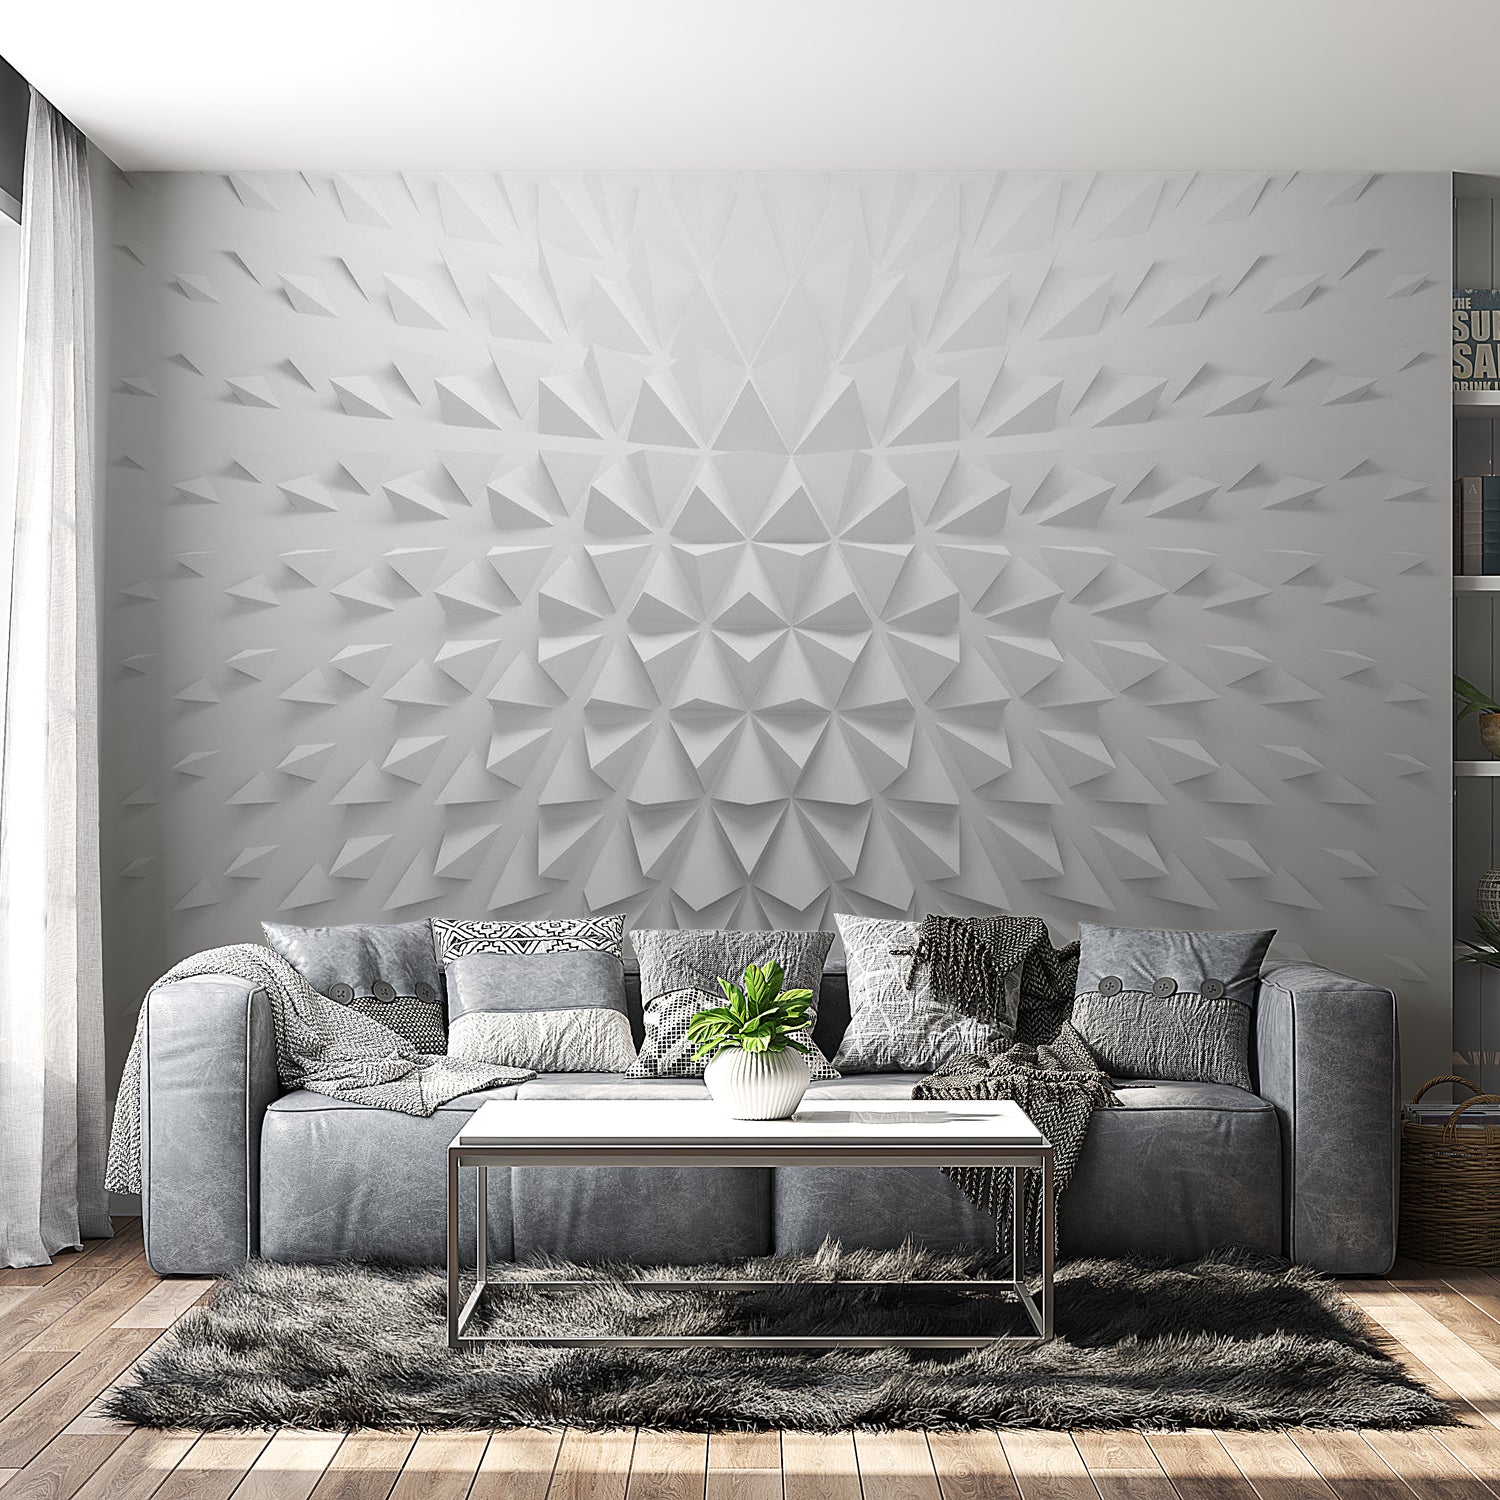 Peel & Stick 3D Illusion Wall Mural - Tetrahedrons - Removable Wall Decals